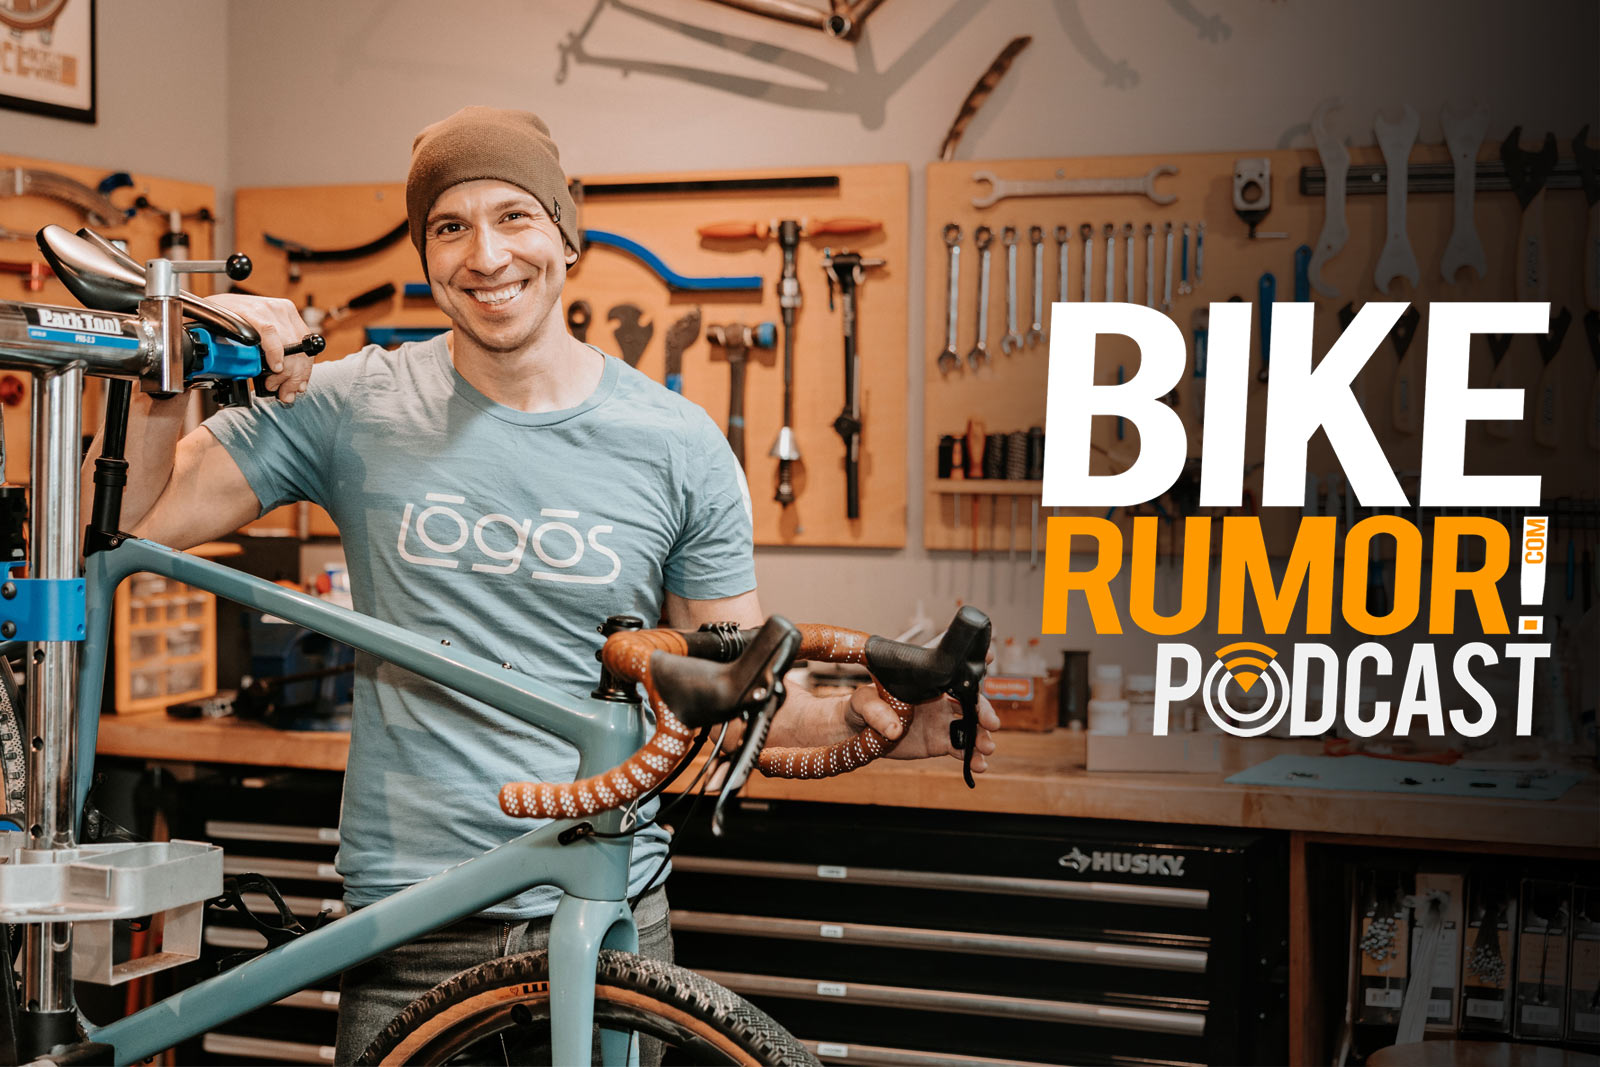 bikerumor podcast interview with randall jacobs about what is wrong with the cycling industry